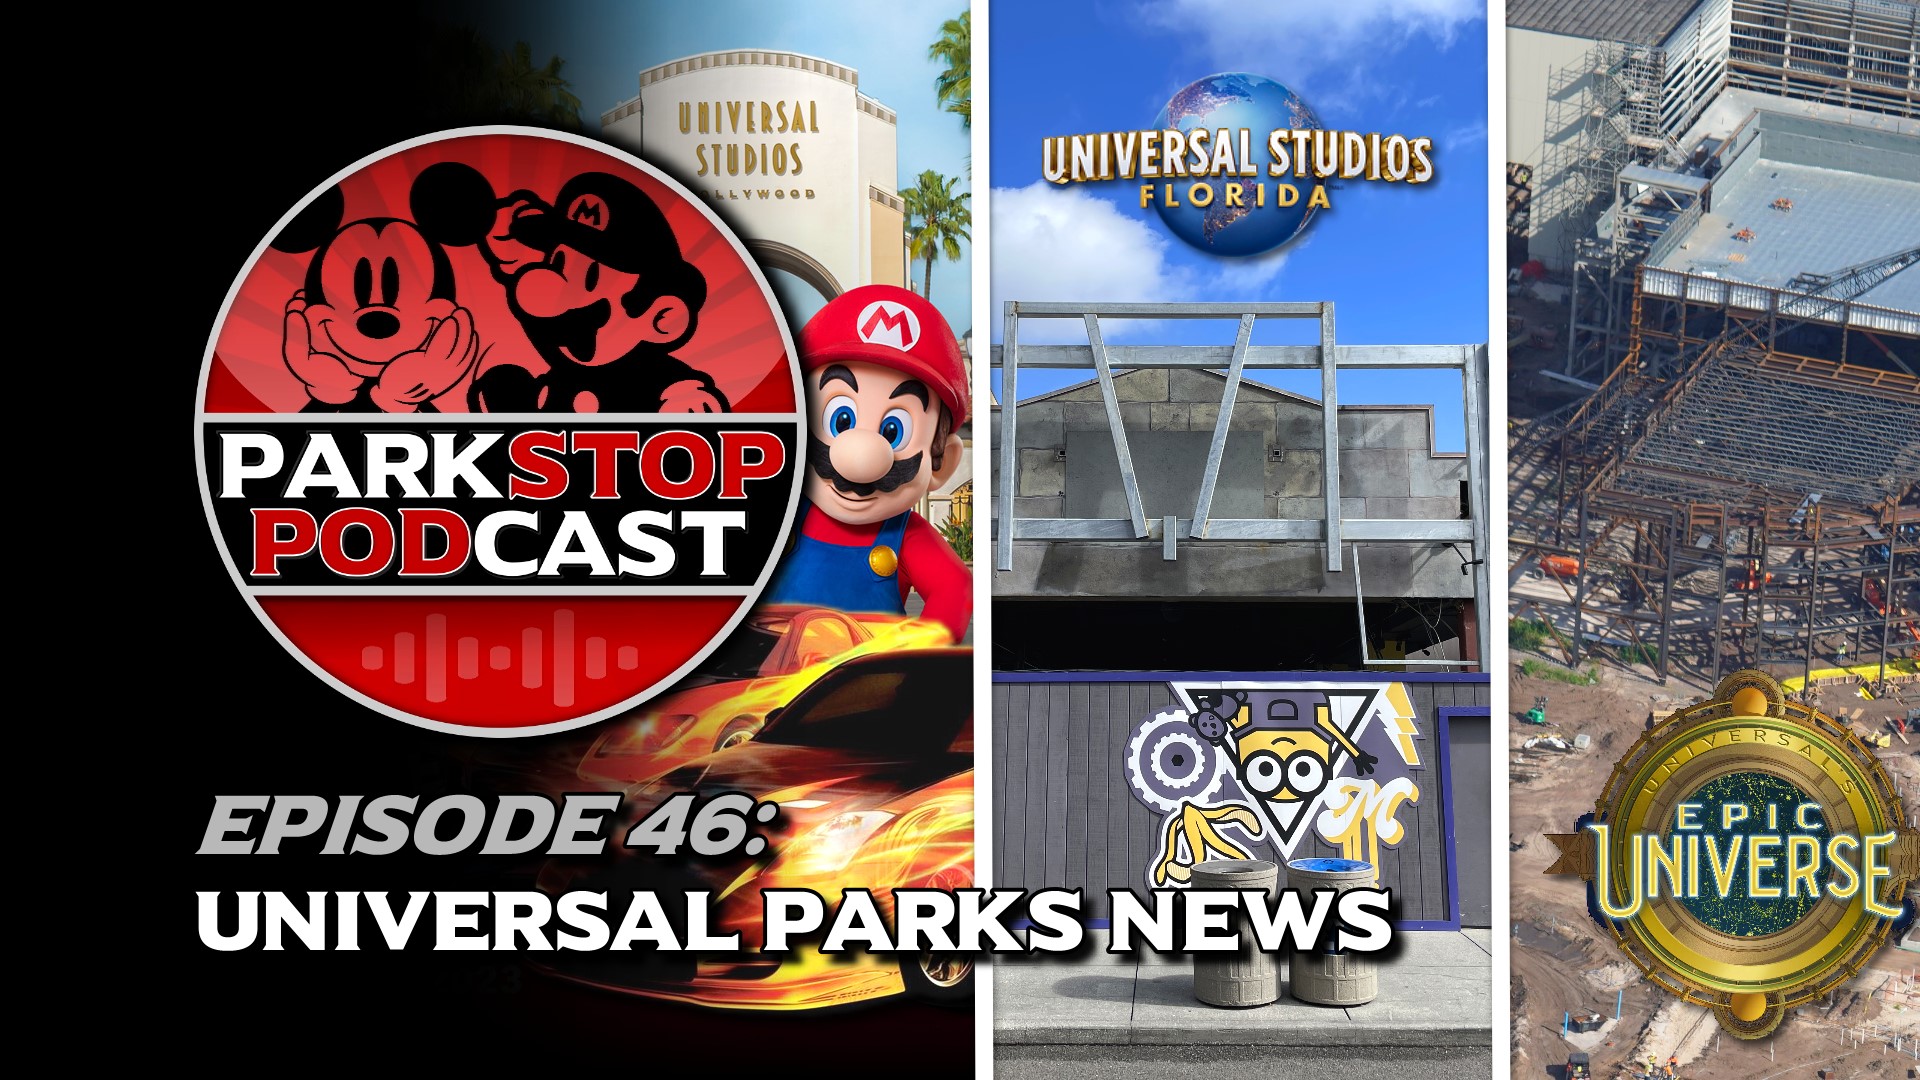 ParkStop Podcast: Episode 46 – Universal Hollywood Rumors and Epic Universe News